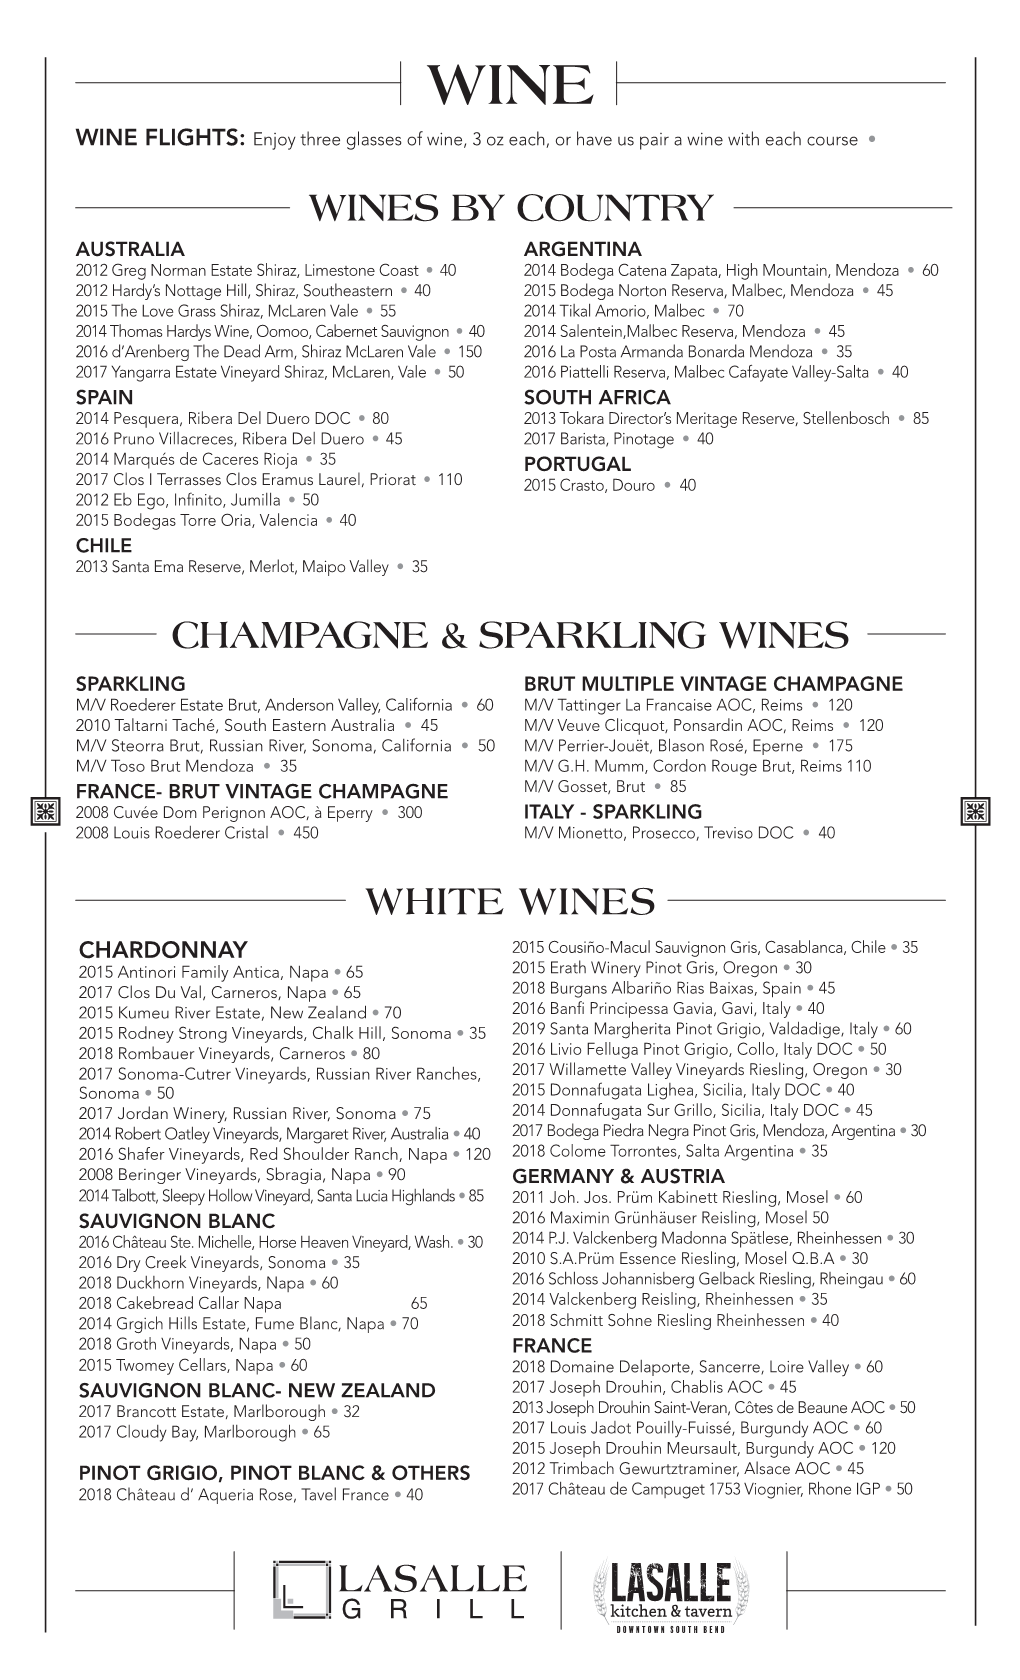 Wines by Country White Wines Champagne & Sparkling Wines